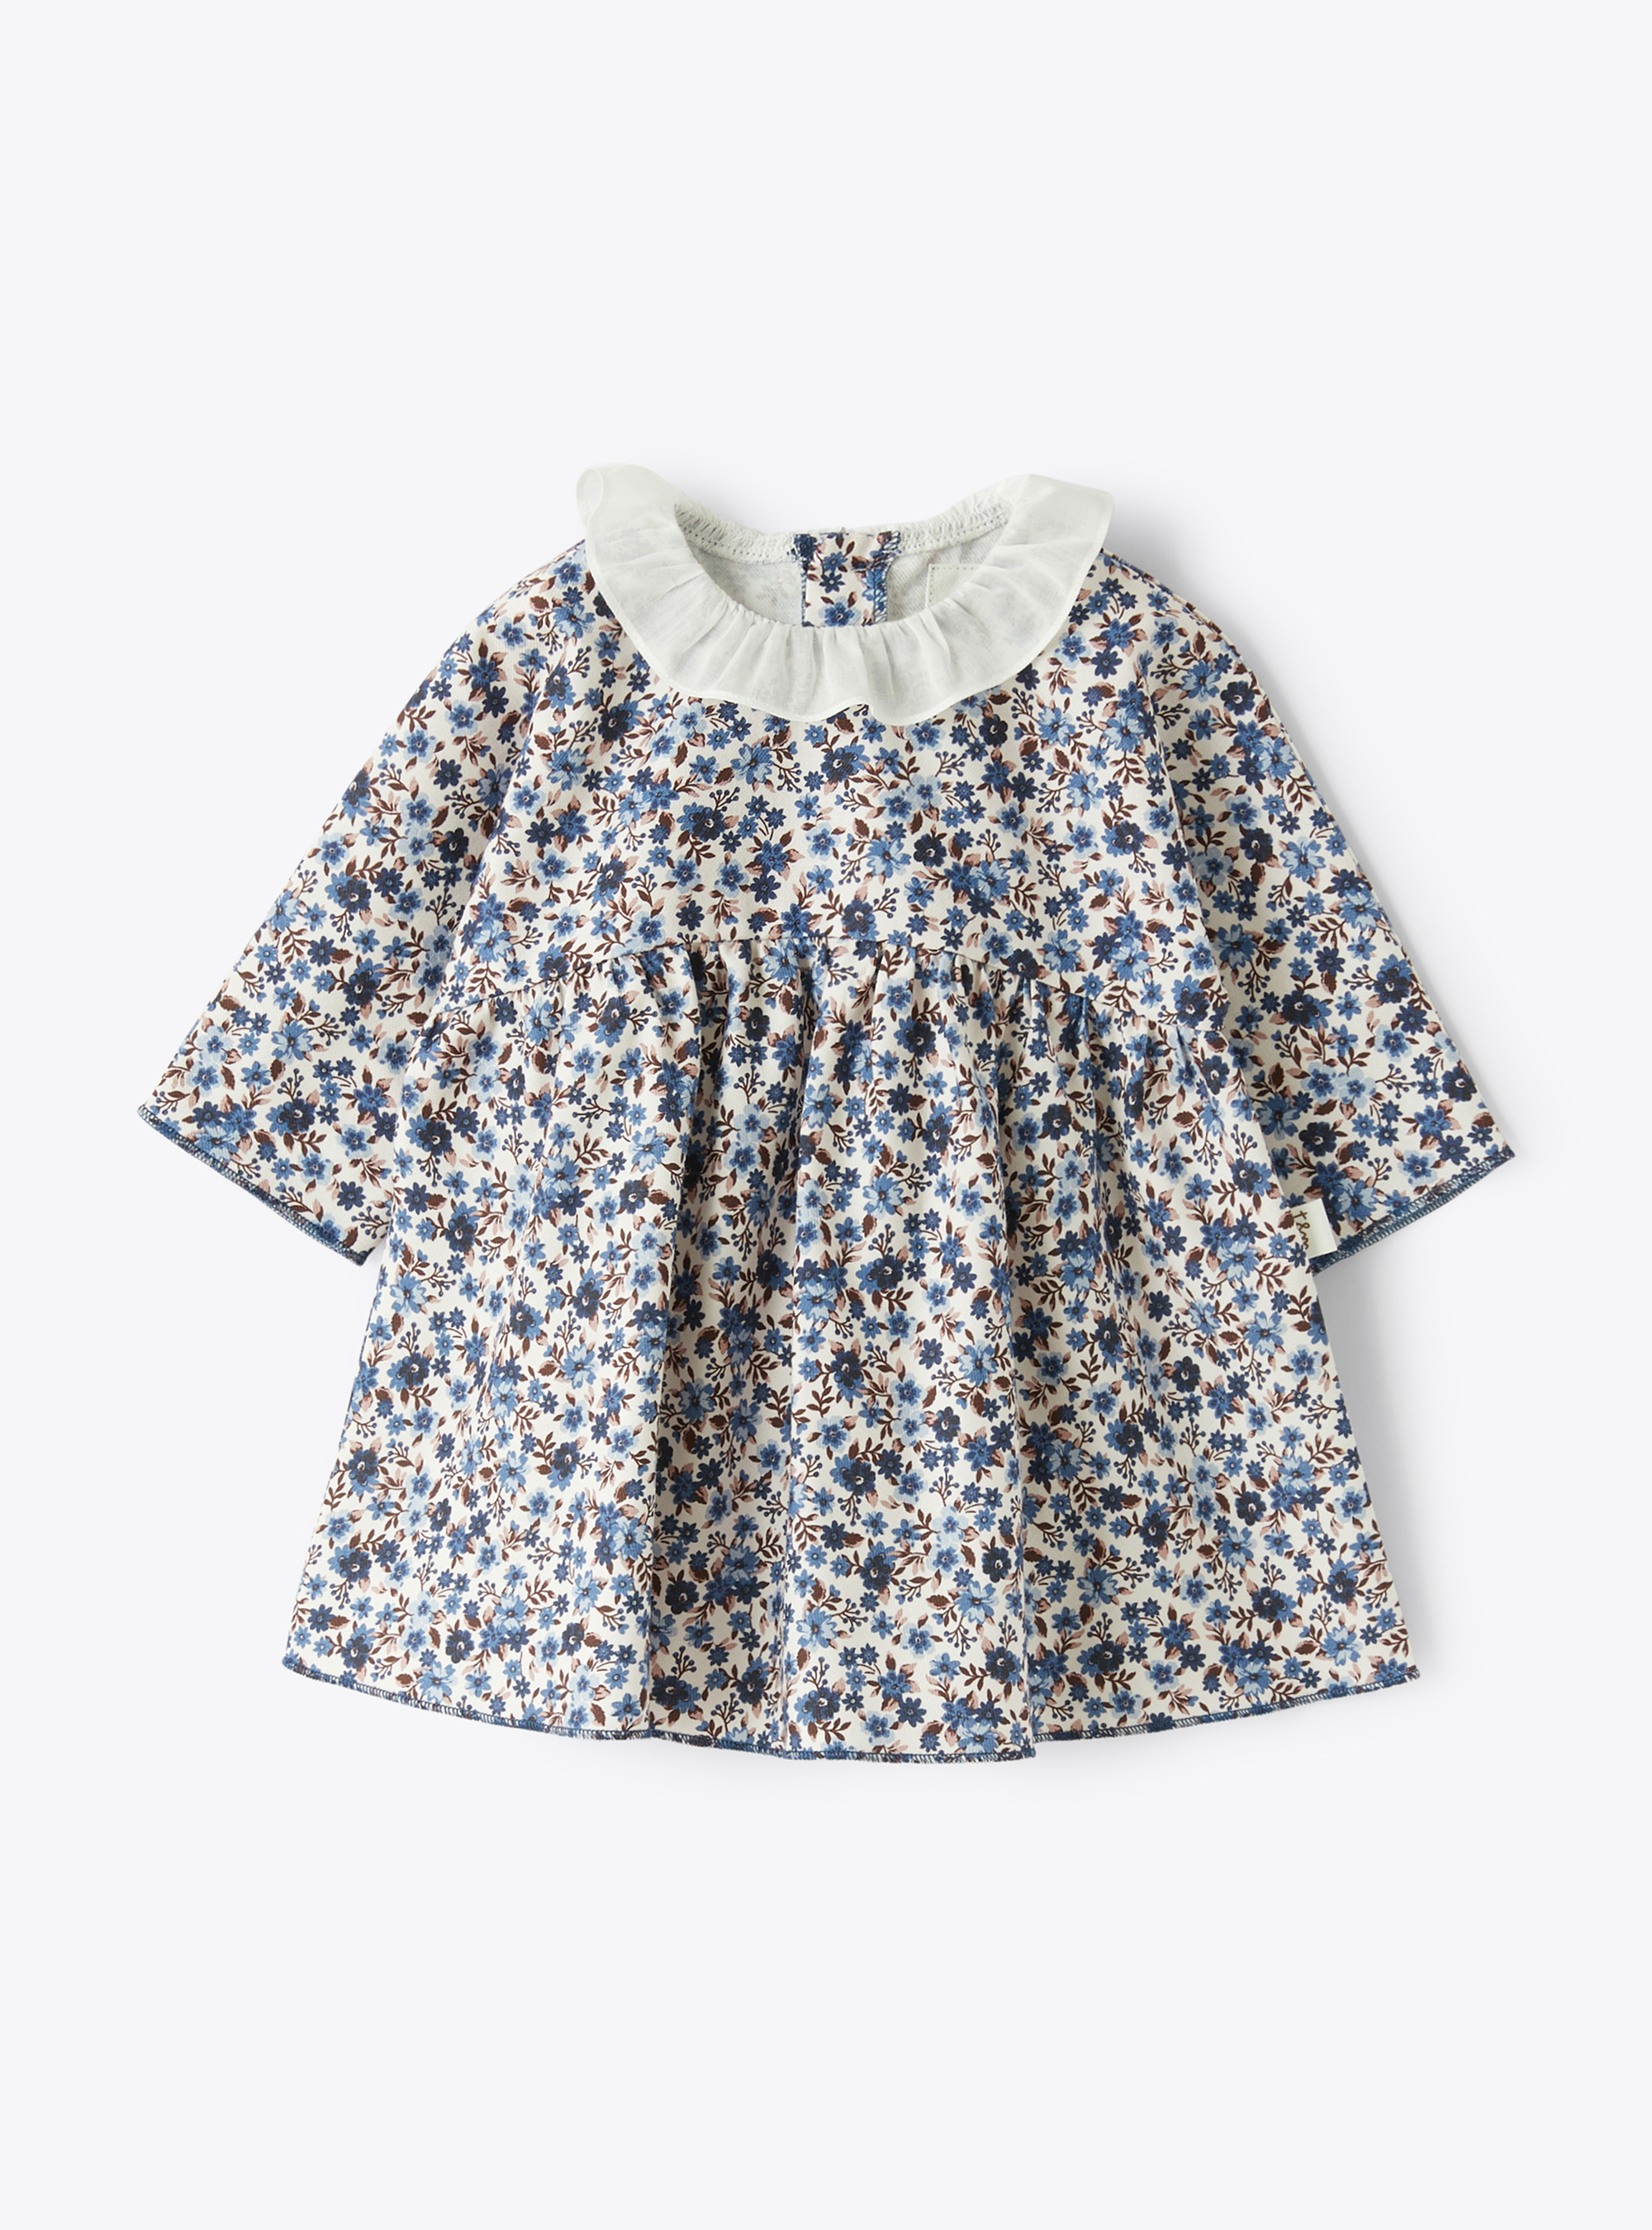 Dress in floral-patterned organic cotton - Dresses - Il Gufo